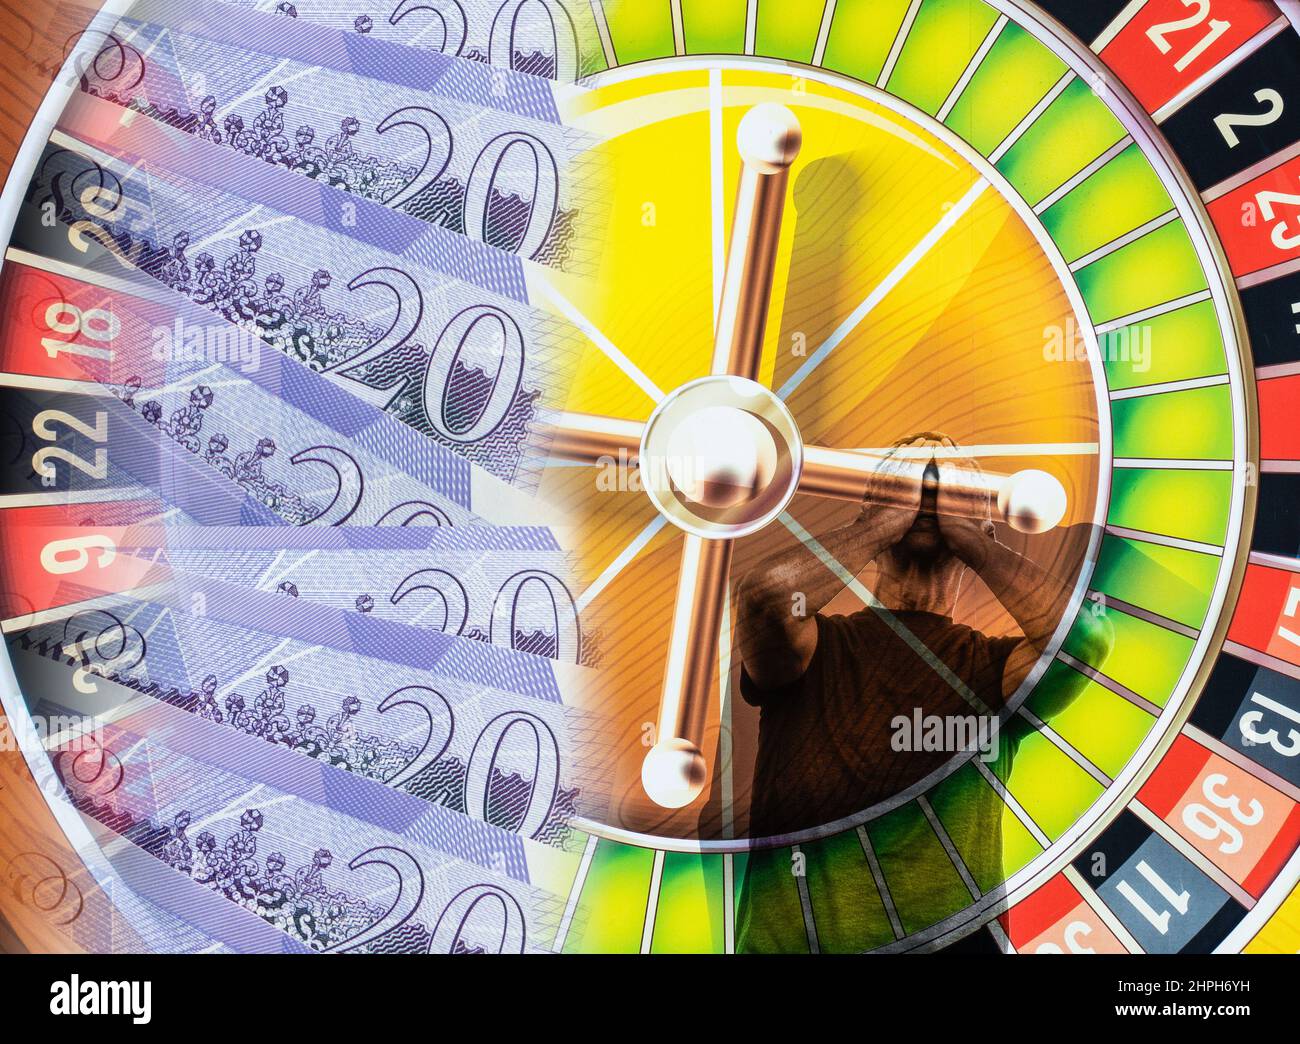 Twenty pound notes on roulette wheel with man with hand over face. Gambling addiction, Gambling industry, mental health... concept Stock Photo